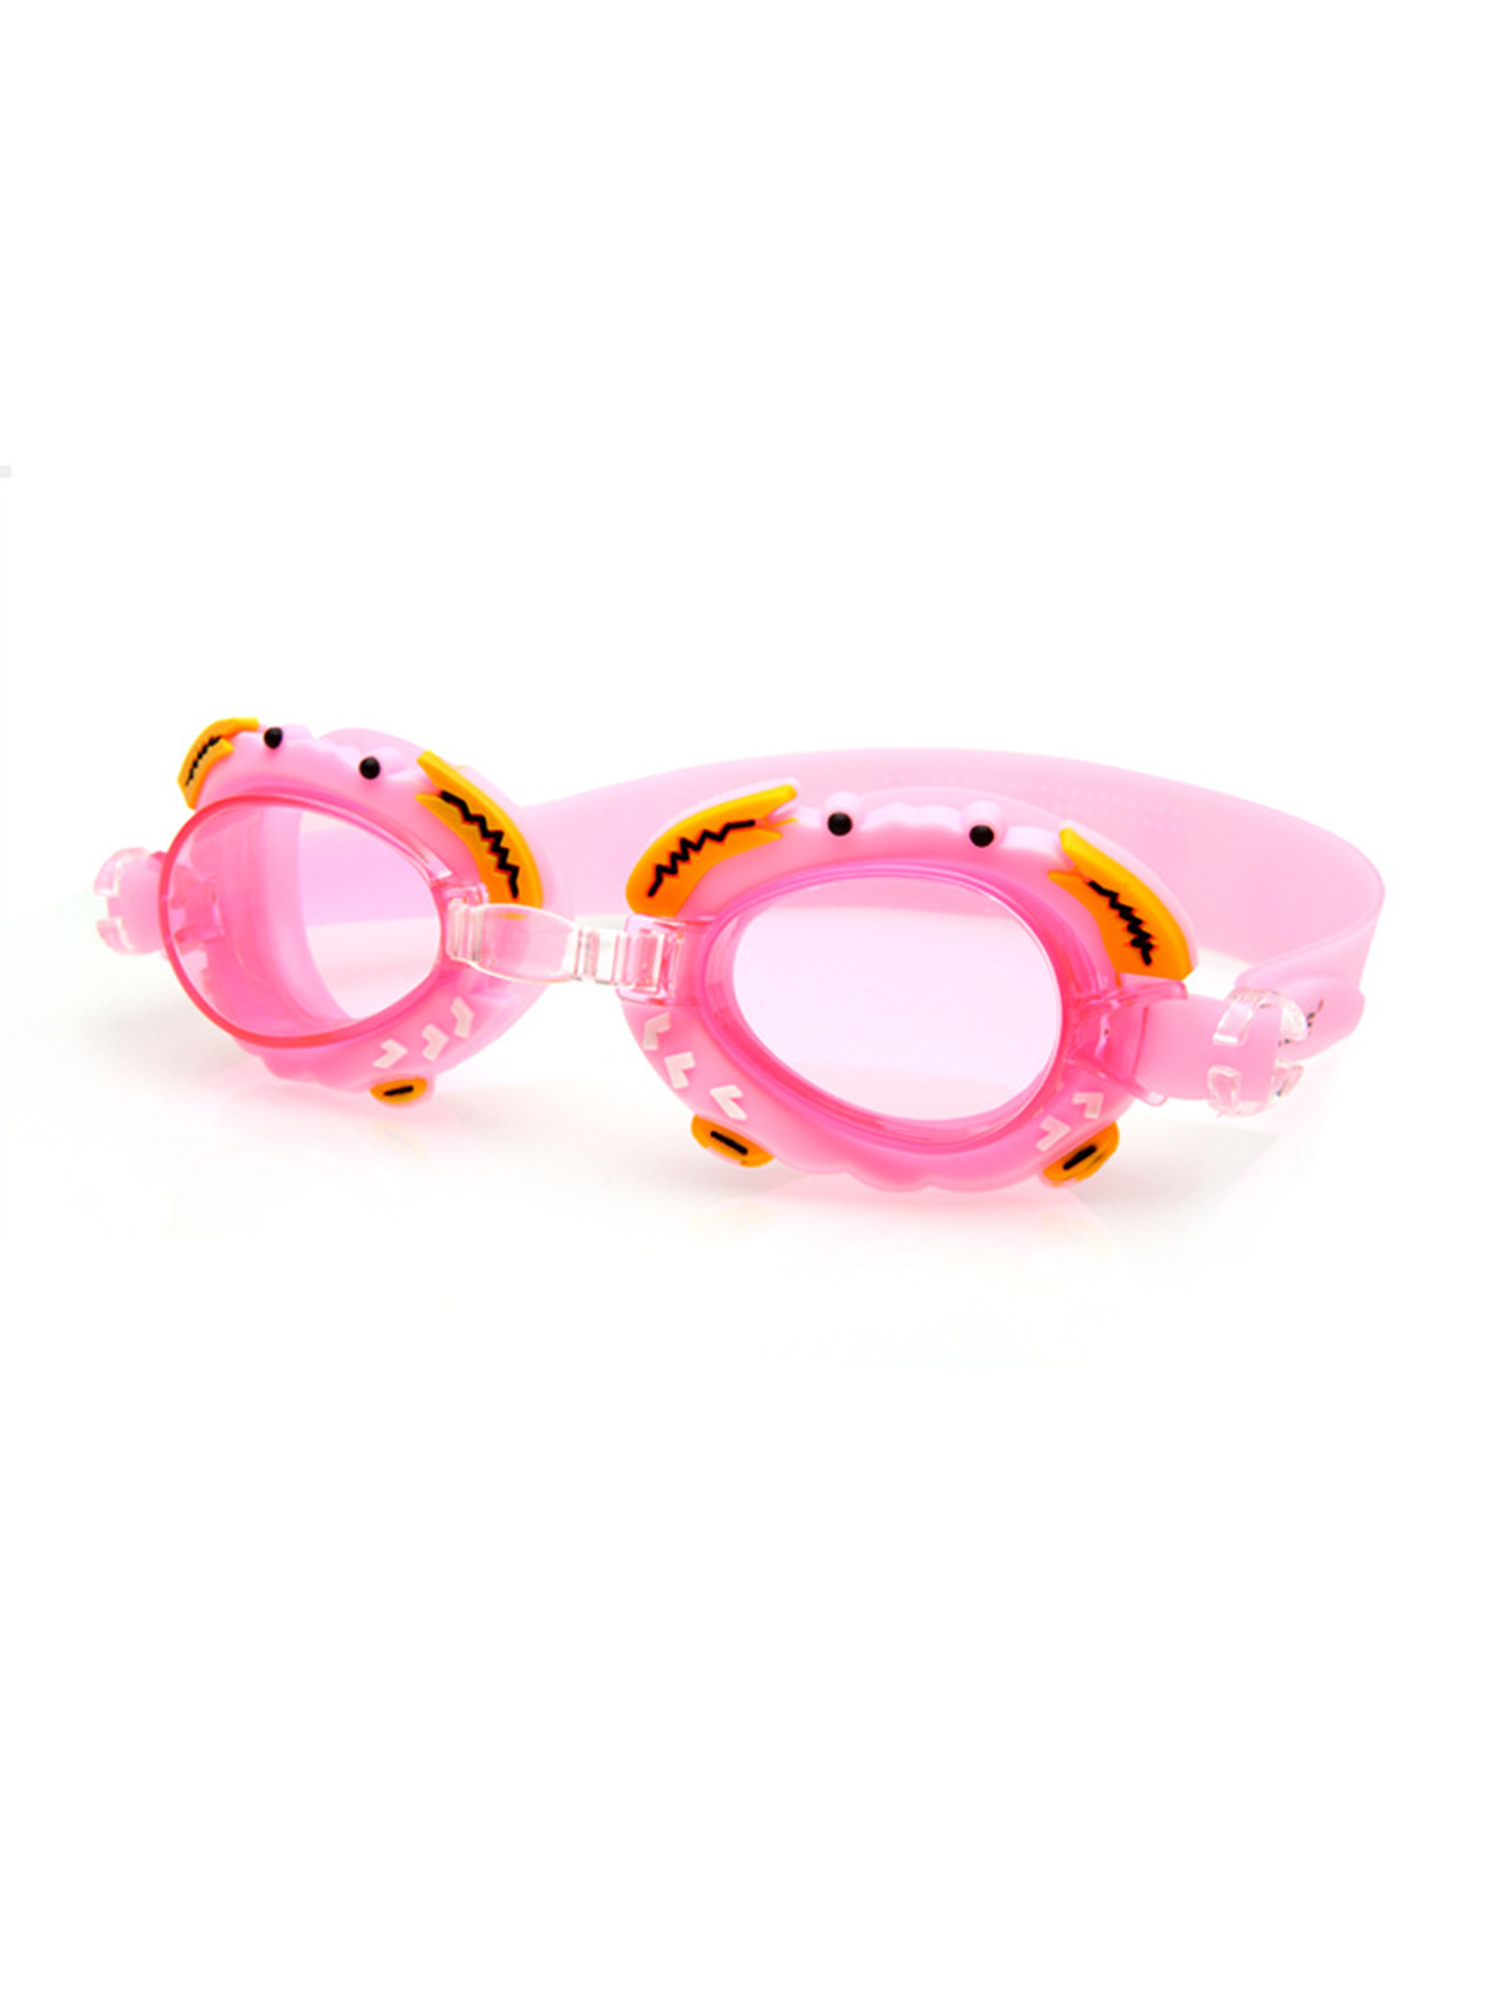 Anyprize 5-12 Years Kid's Waterproof Swim Goggles Anti Fog , Children Swimming Goggels with Nose Clip, Ear Plugs, Protection Case, (A064PK, Pink) - image 2 of 3